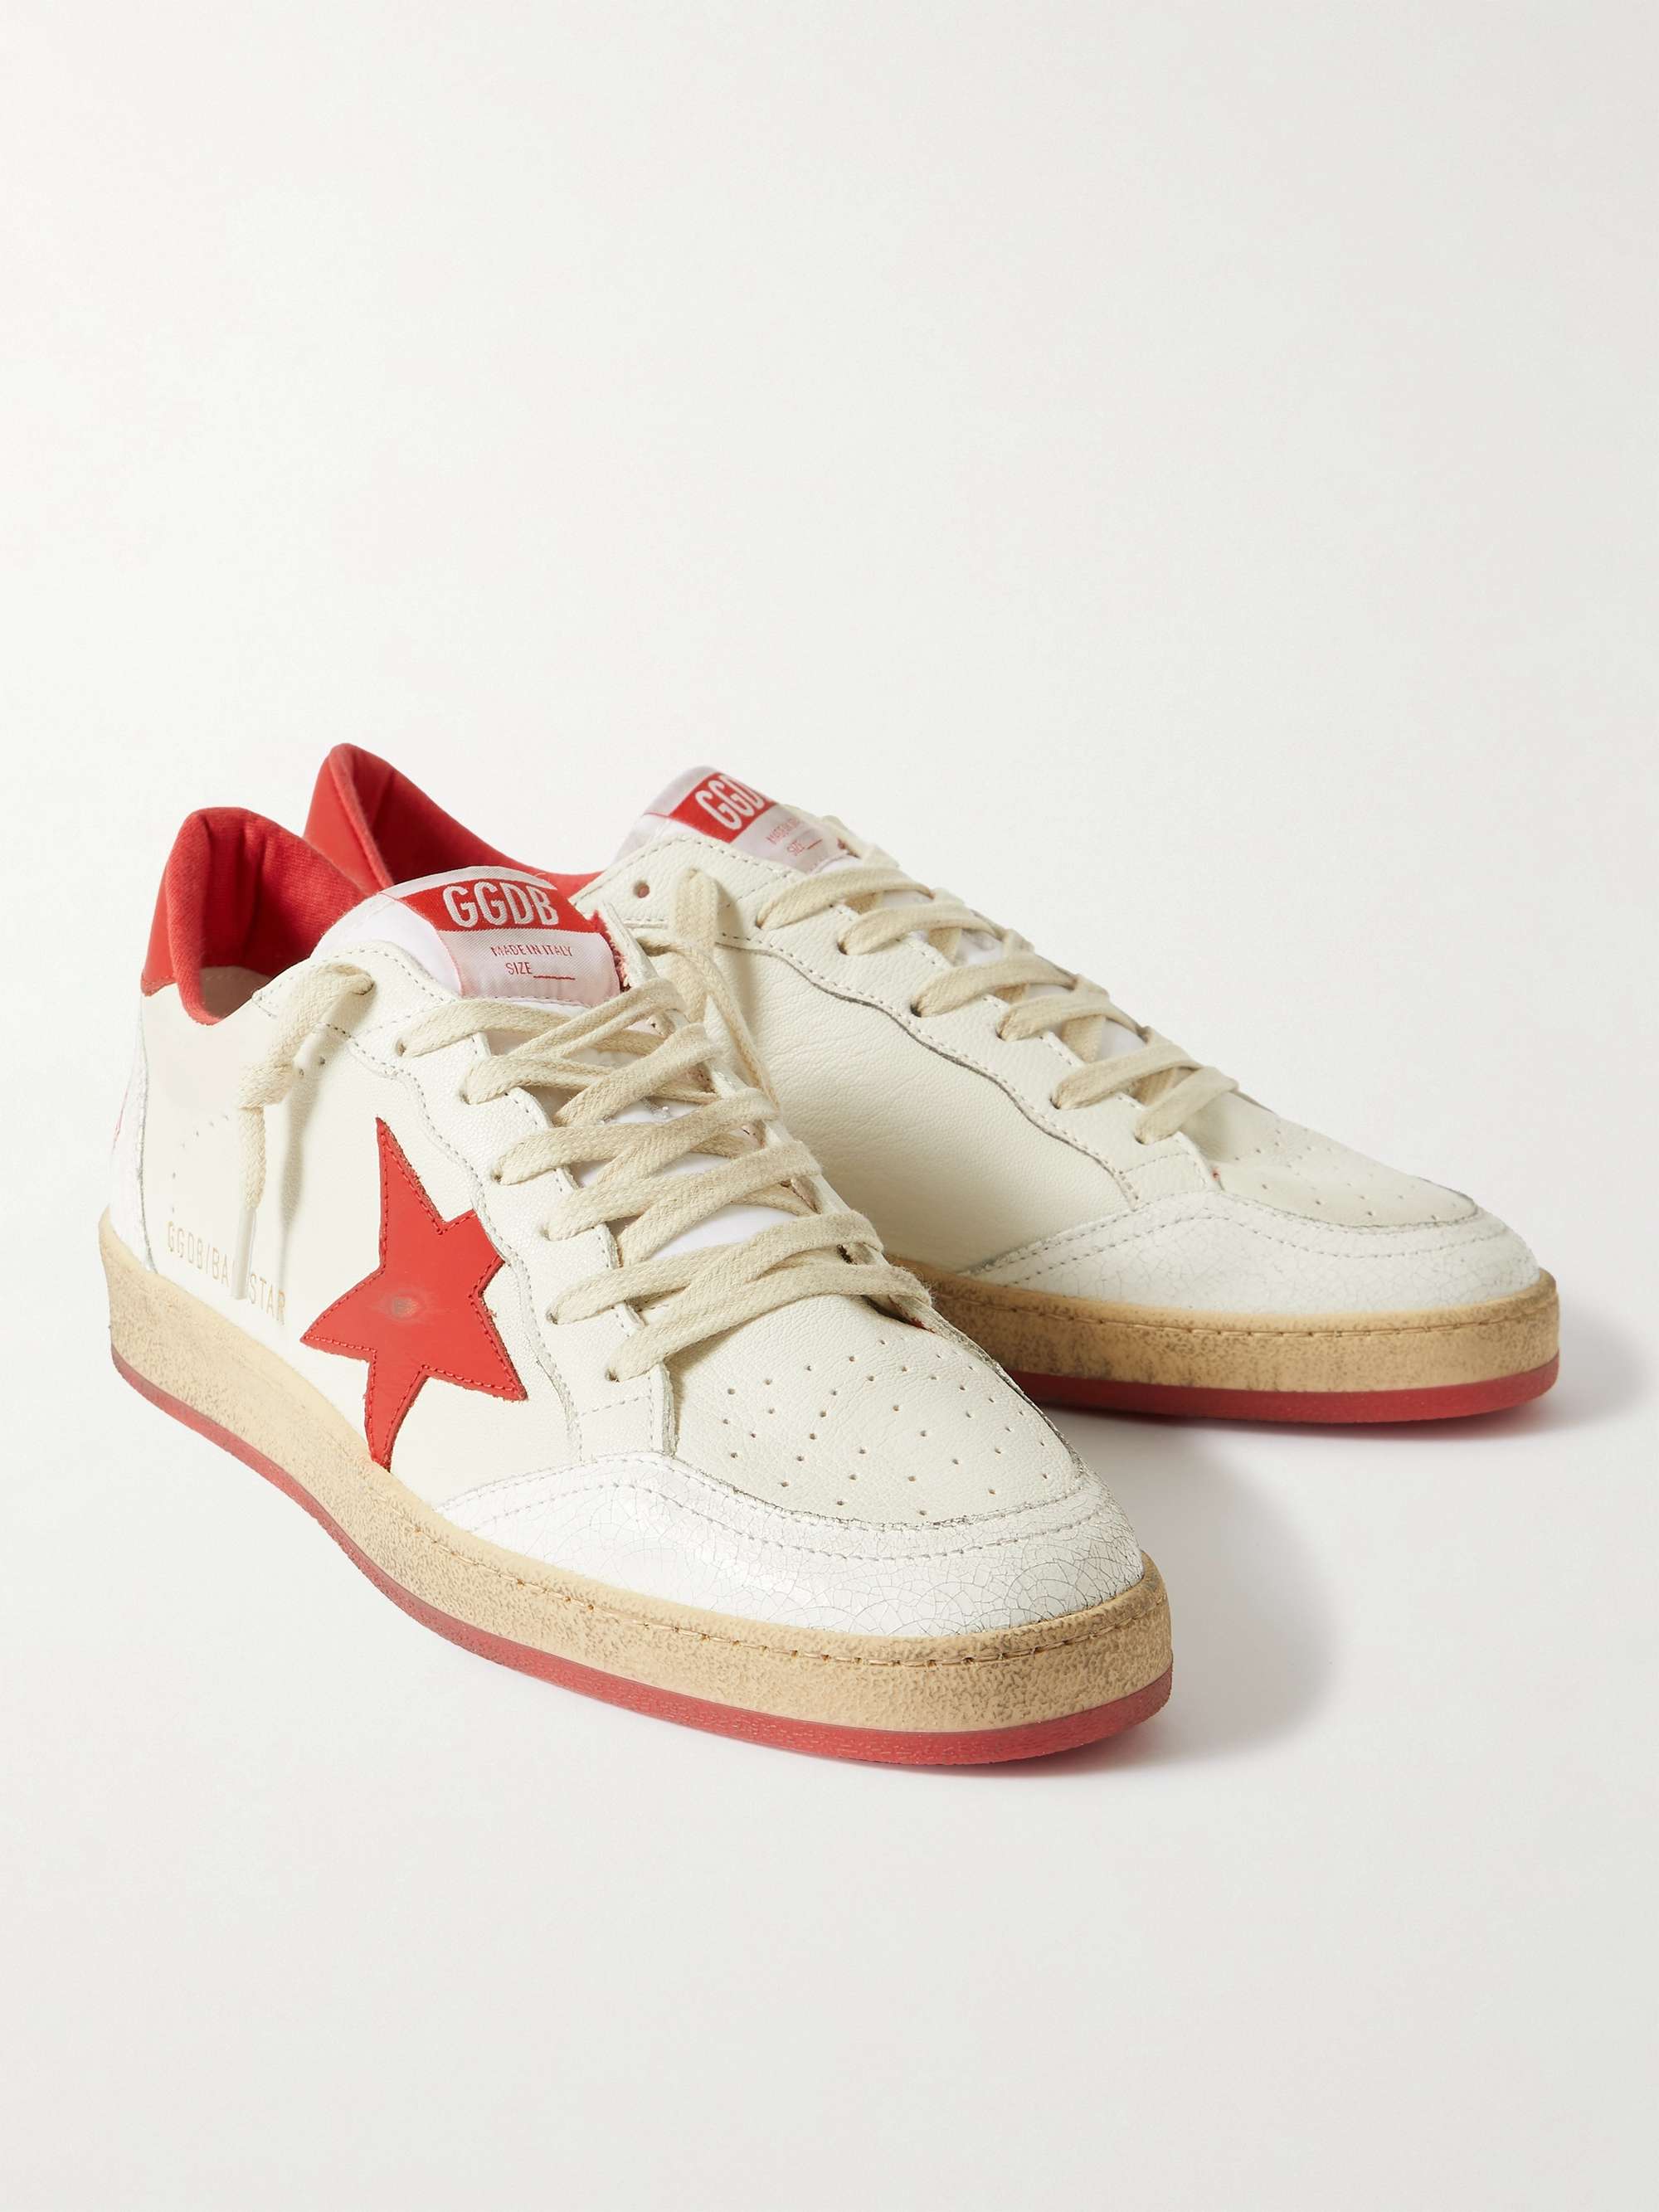 GOLDEN GOOSE Ballstar Distressed Leather Sneakers